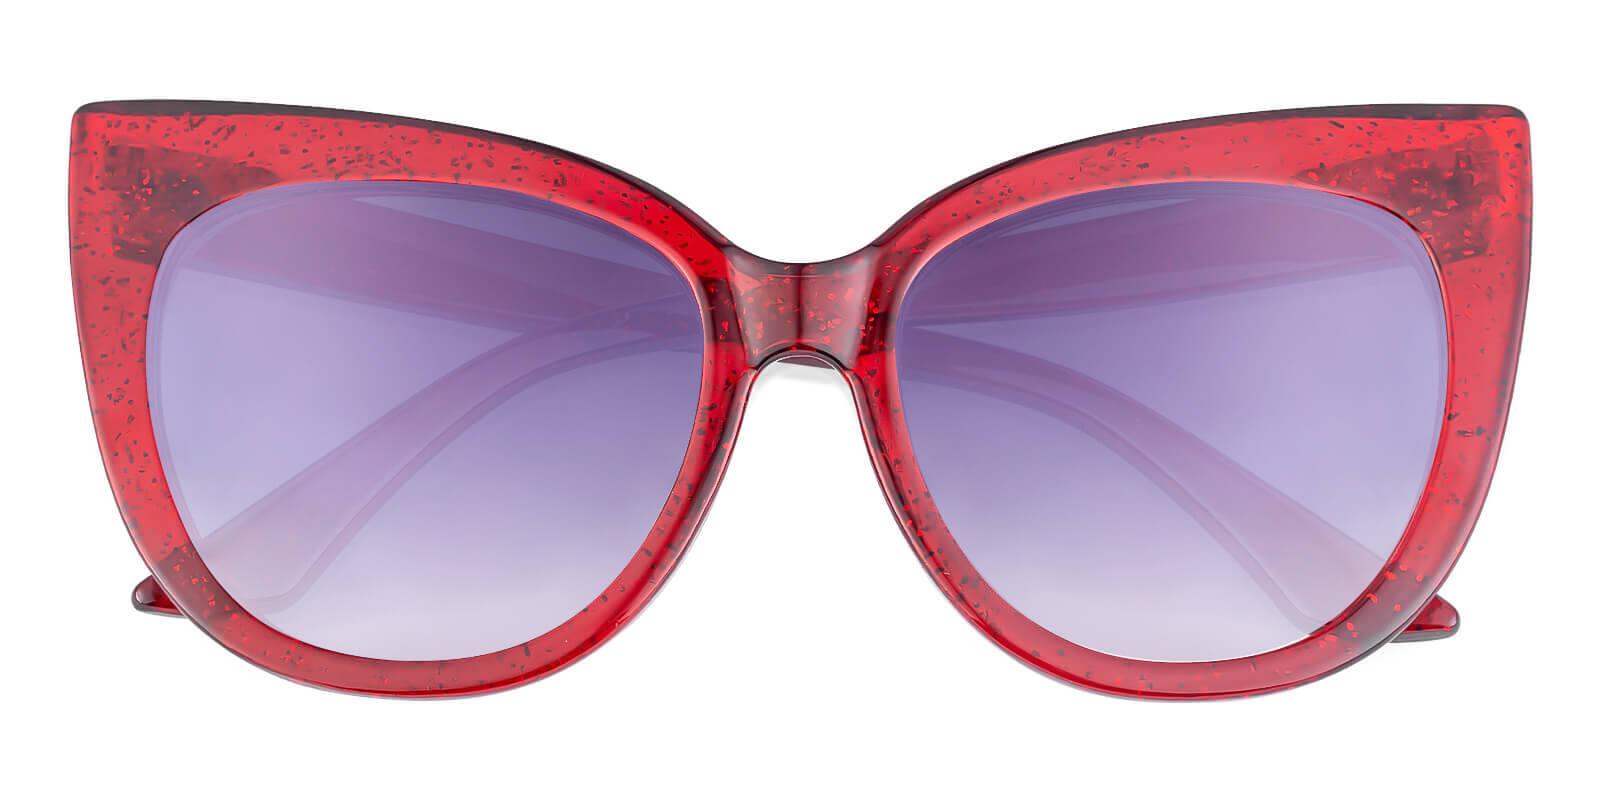 Daikon Red Plastic Fashion , Sunglasses Frames from ABBE Glasses